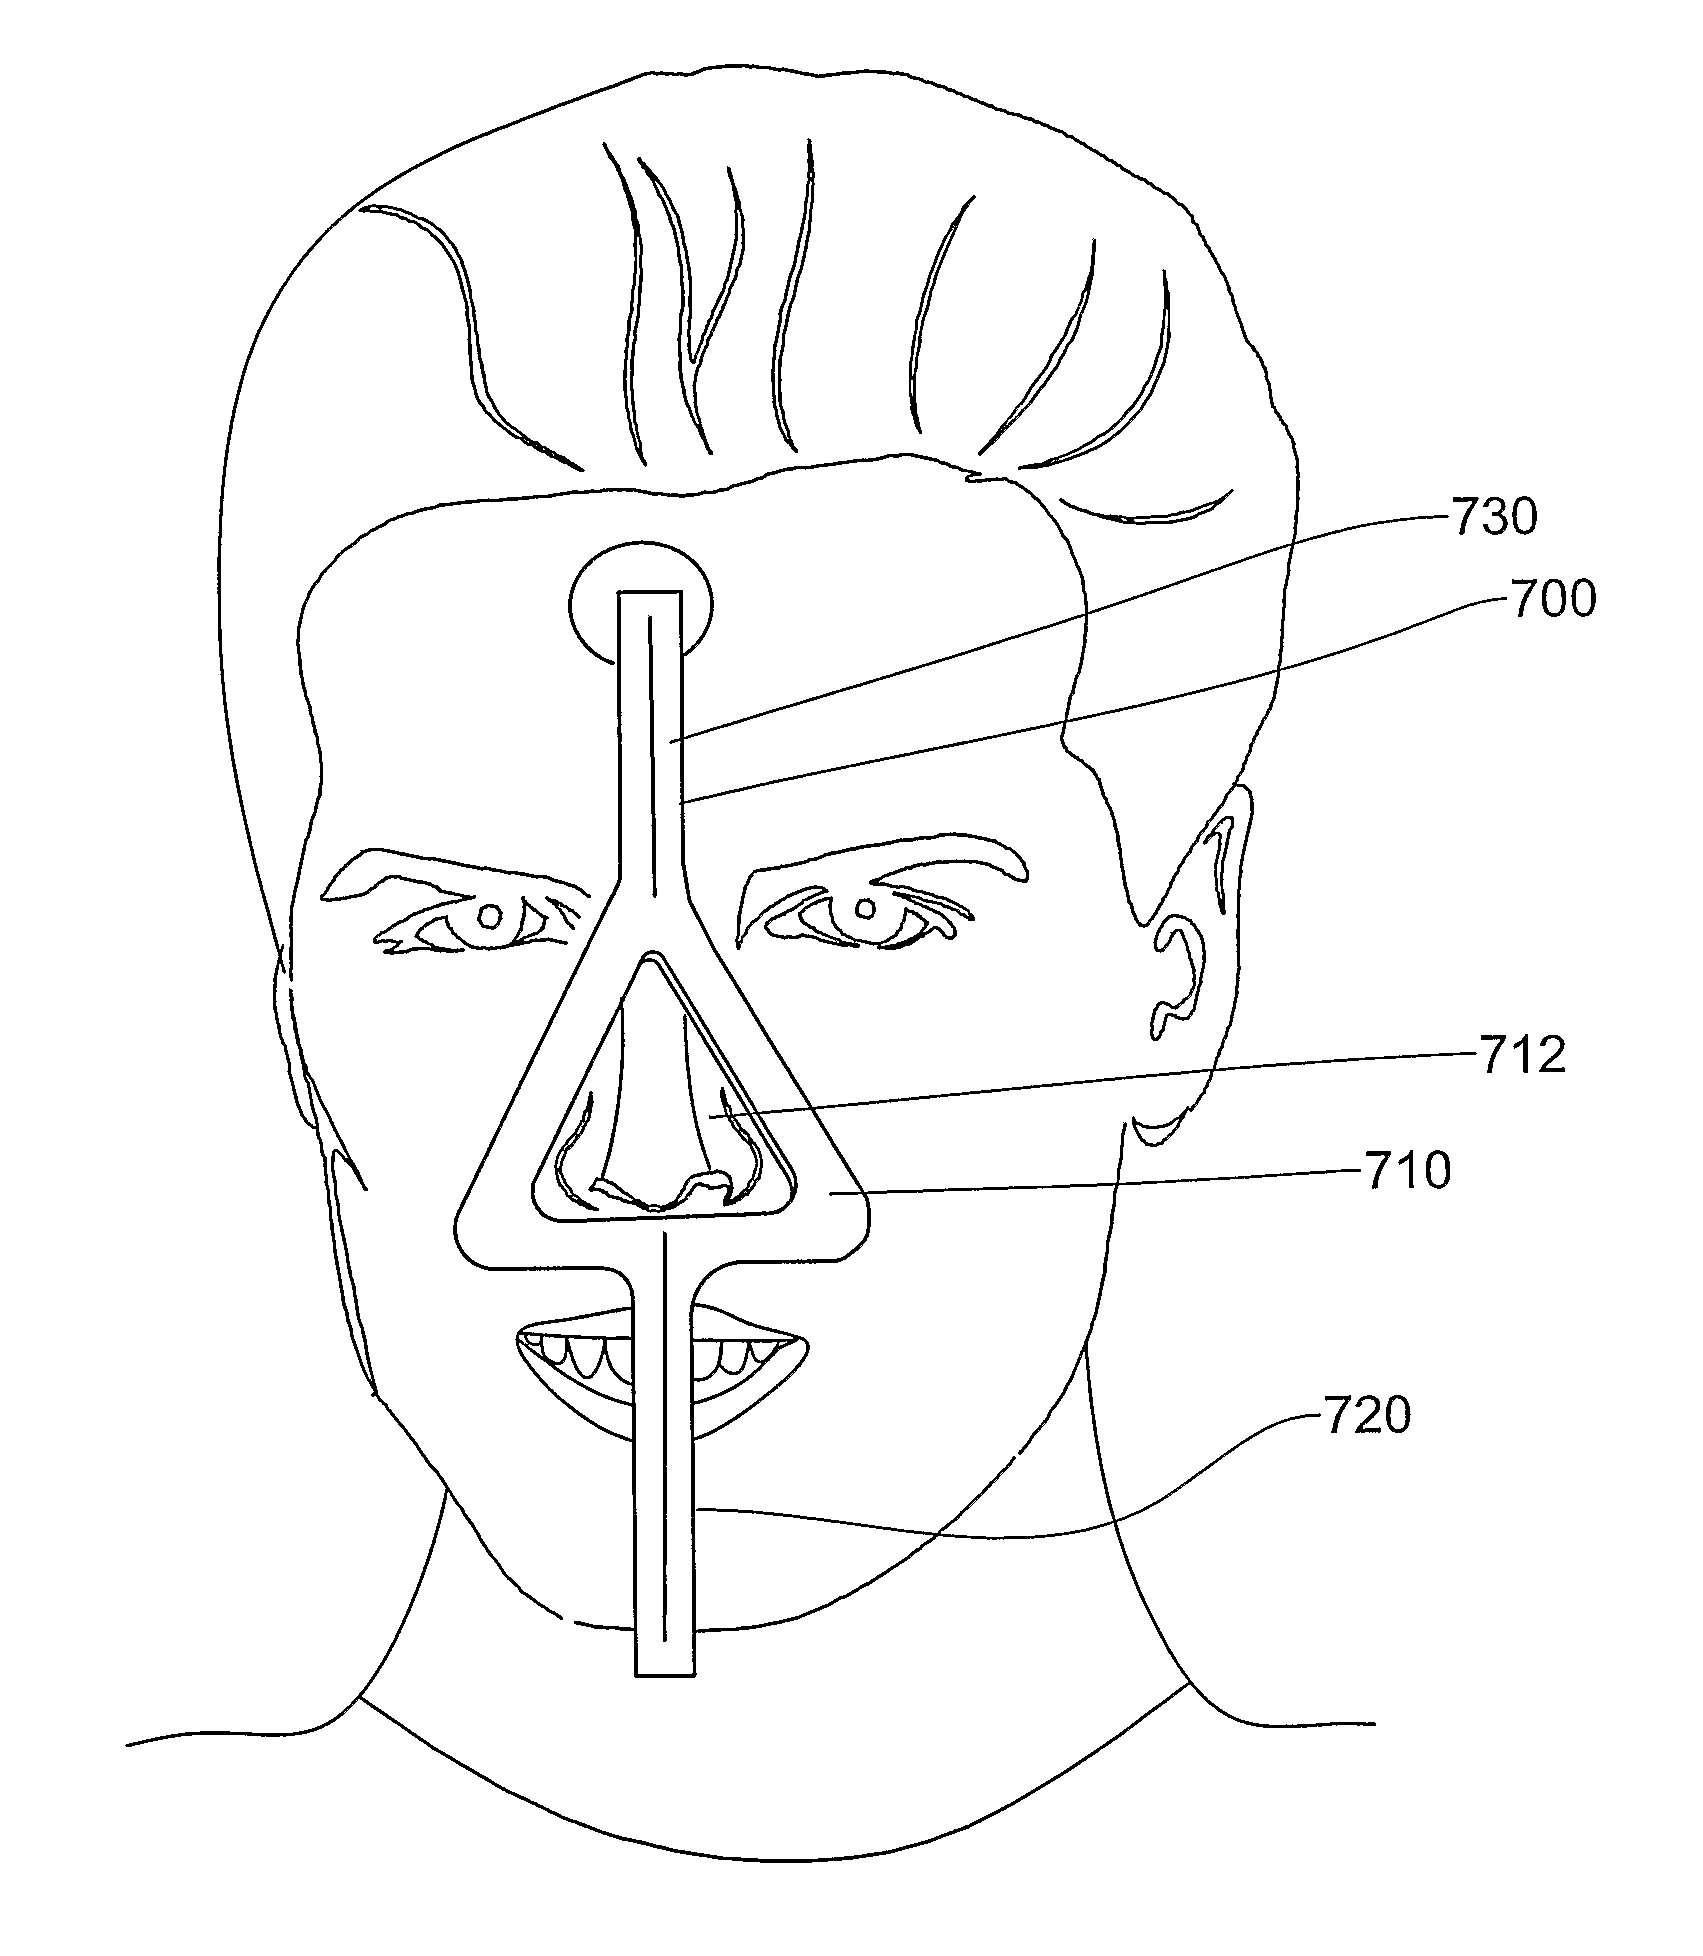 Methods, apparatus and system for use in dental procedures